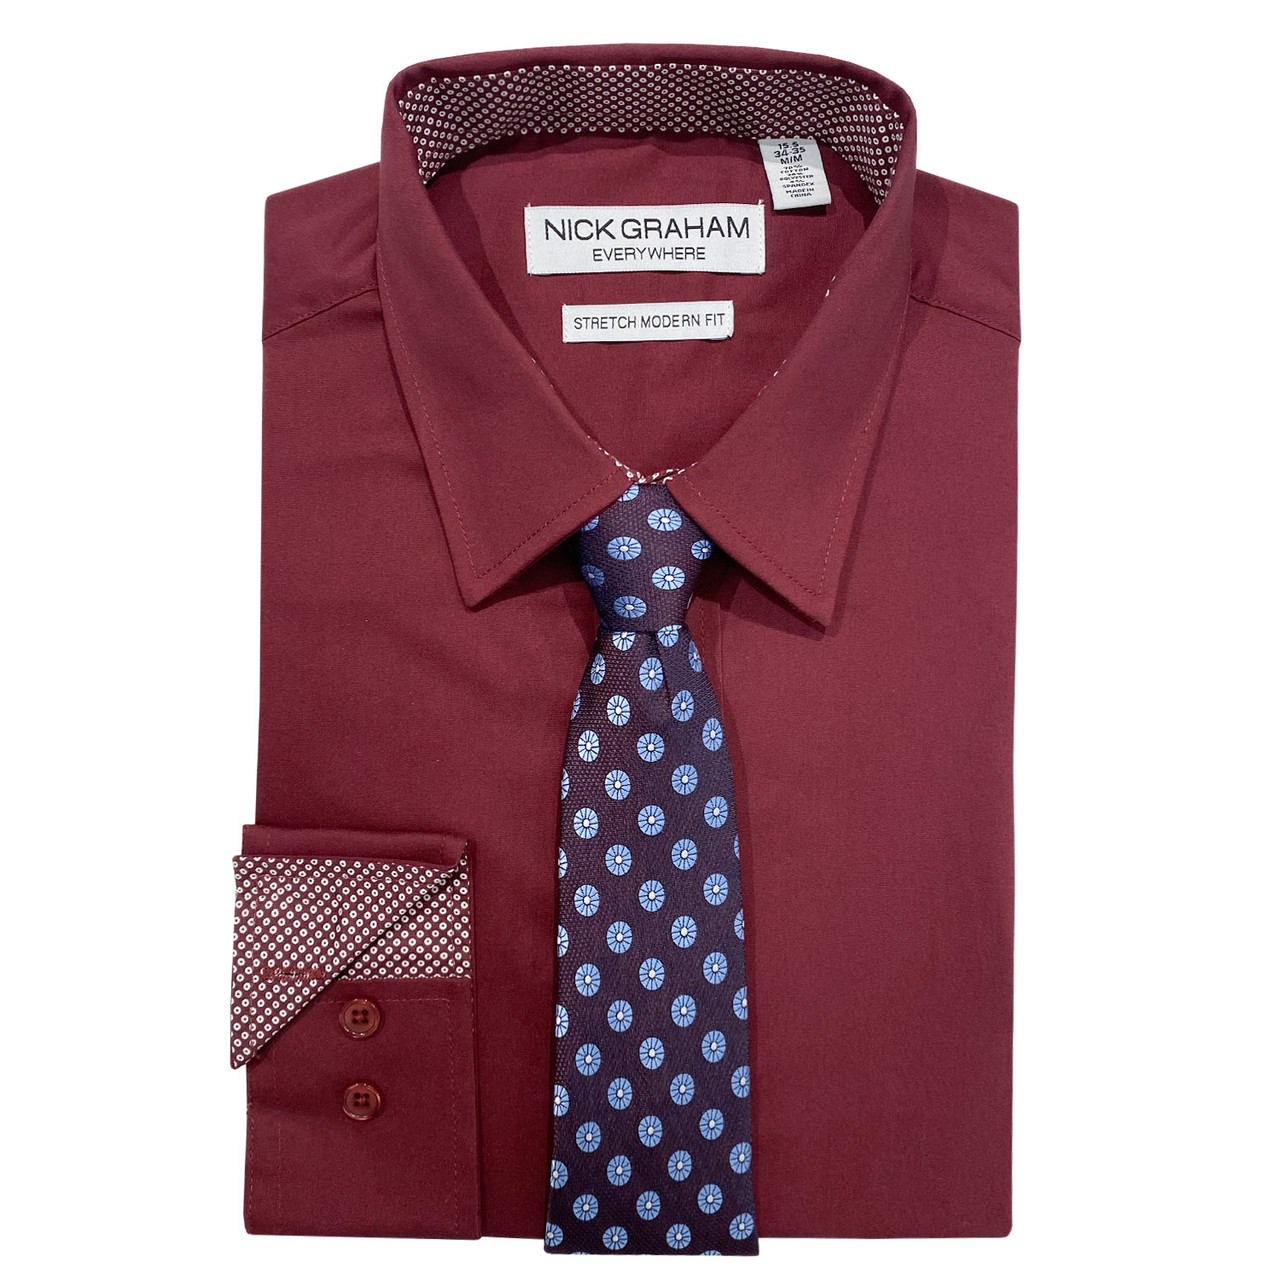 Shirt and Tie Sets, Shirt Tie Combo